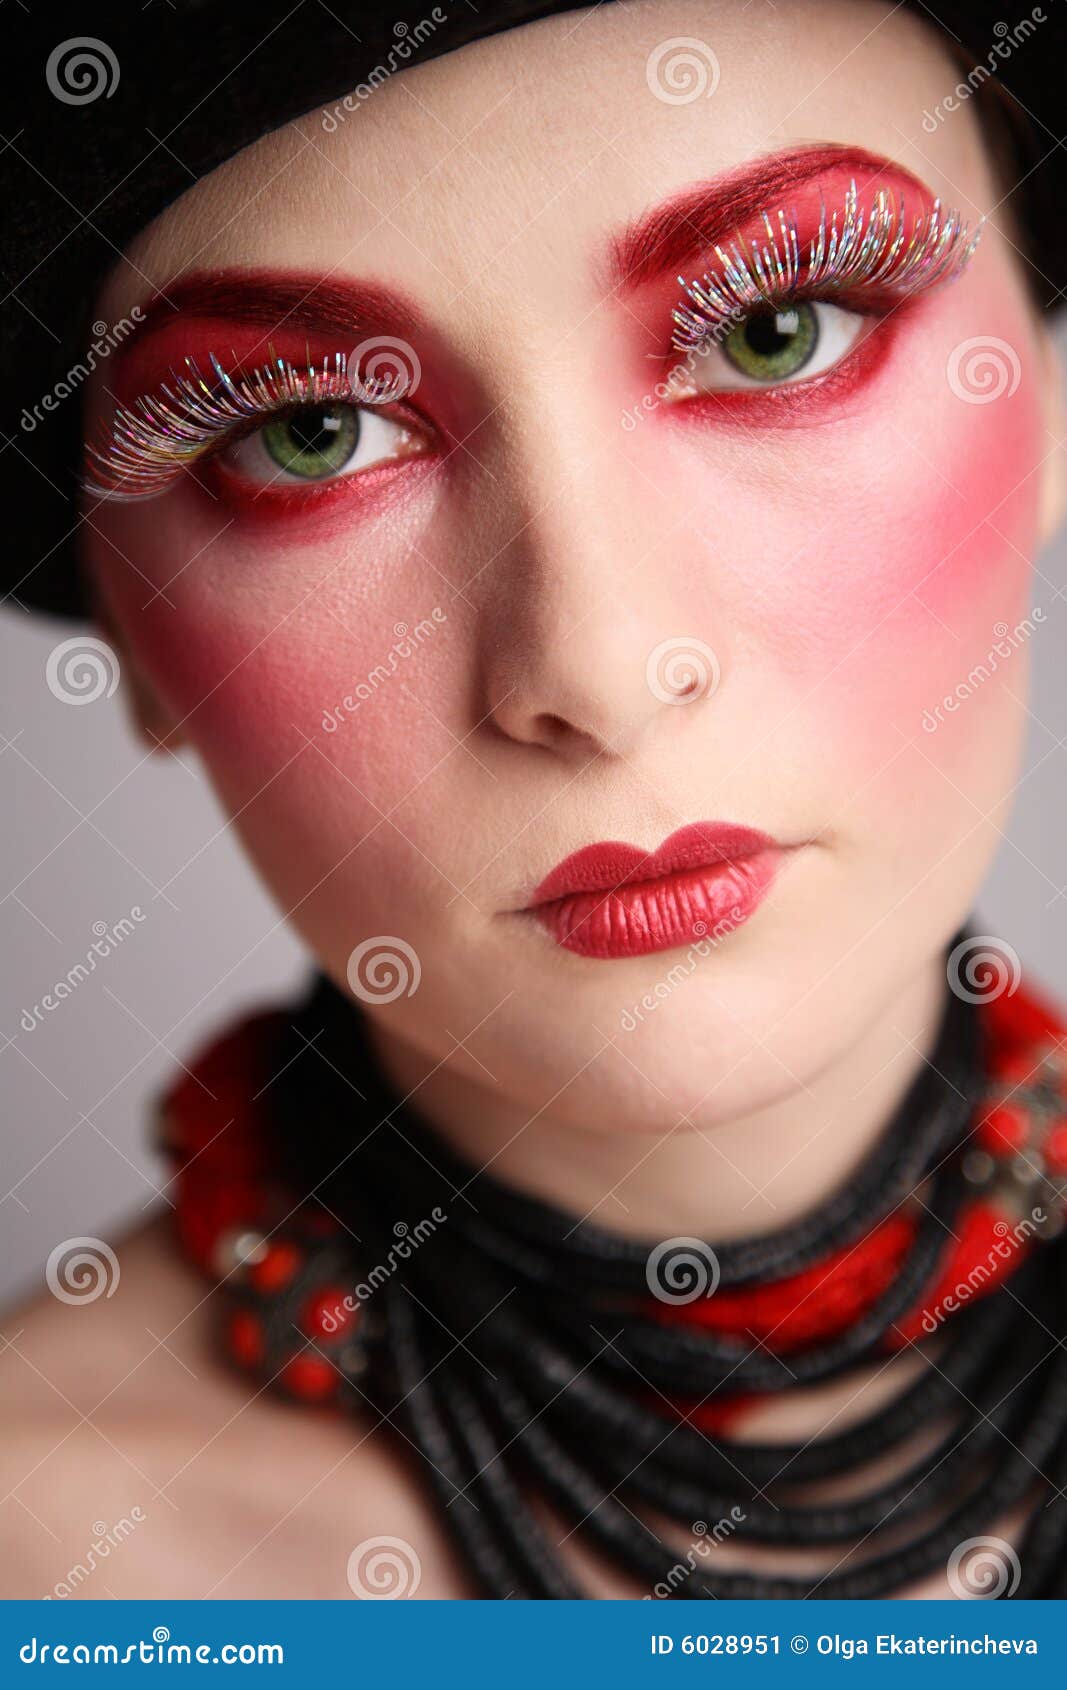 Fancy makeup stock image. Image of makeup, confidence - 6028951